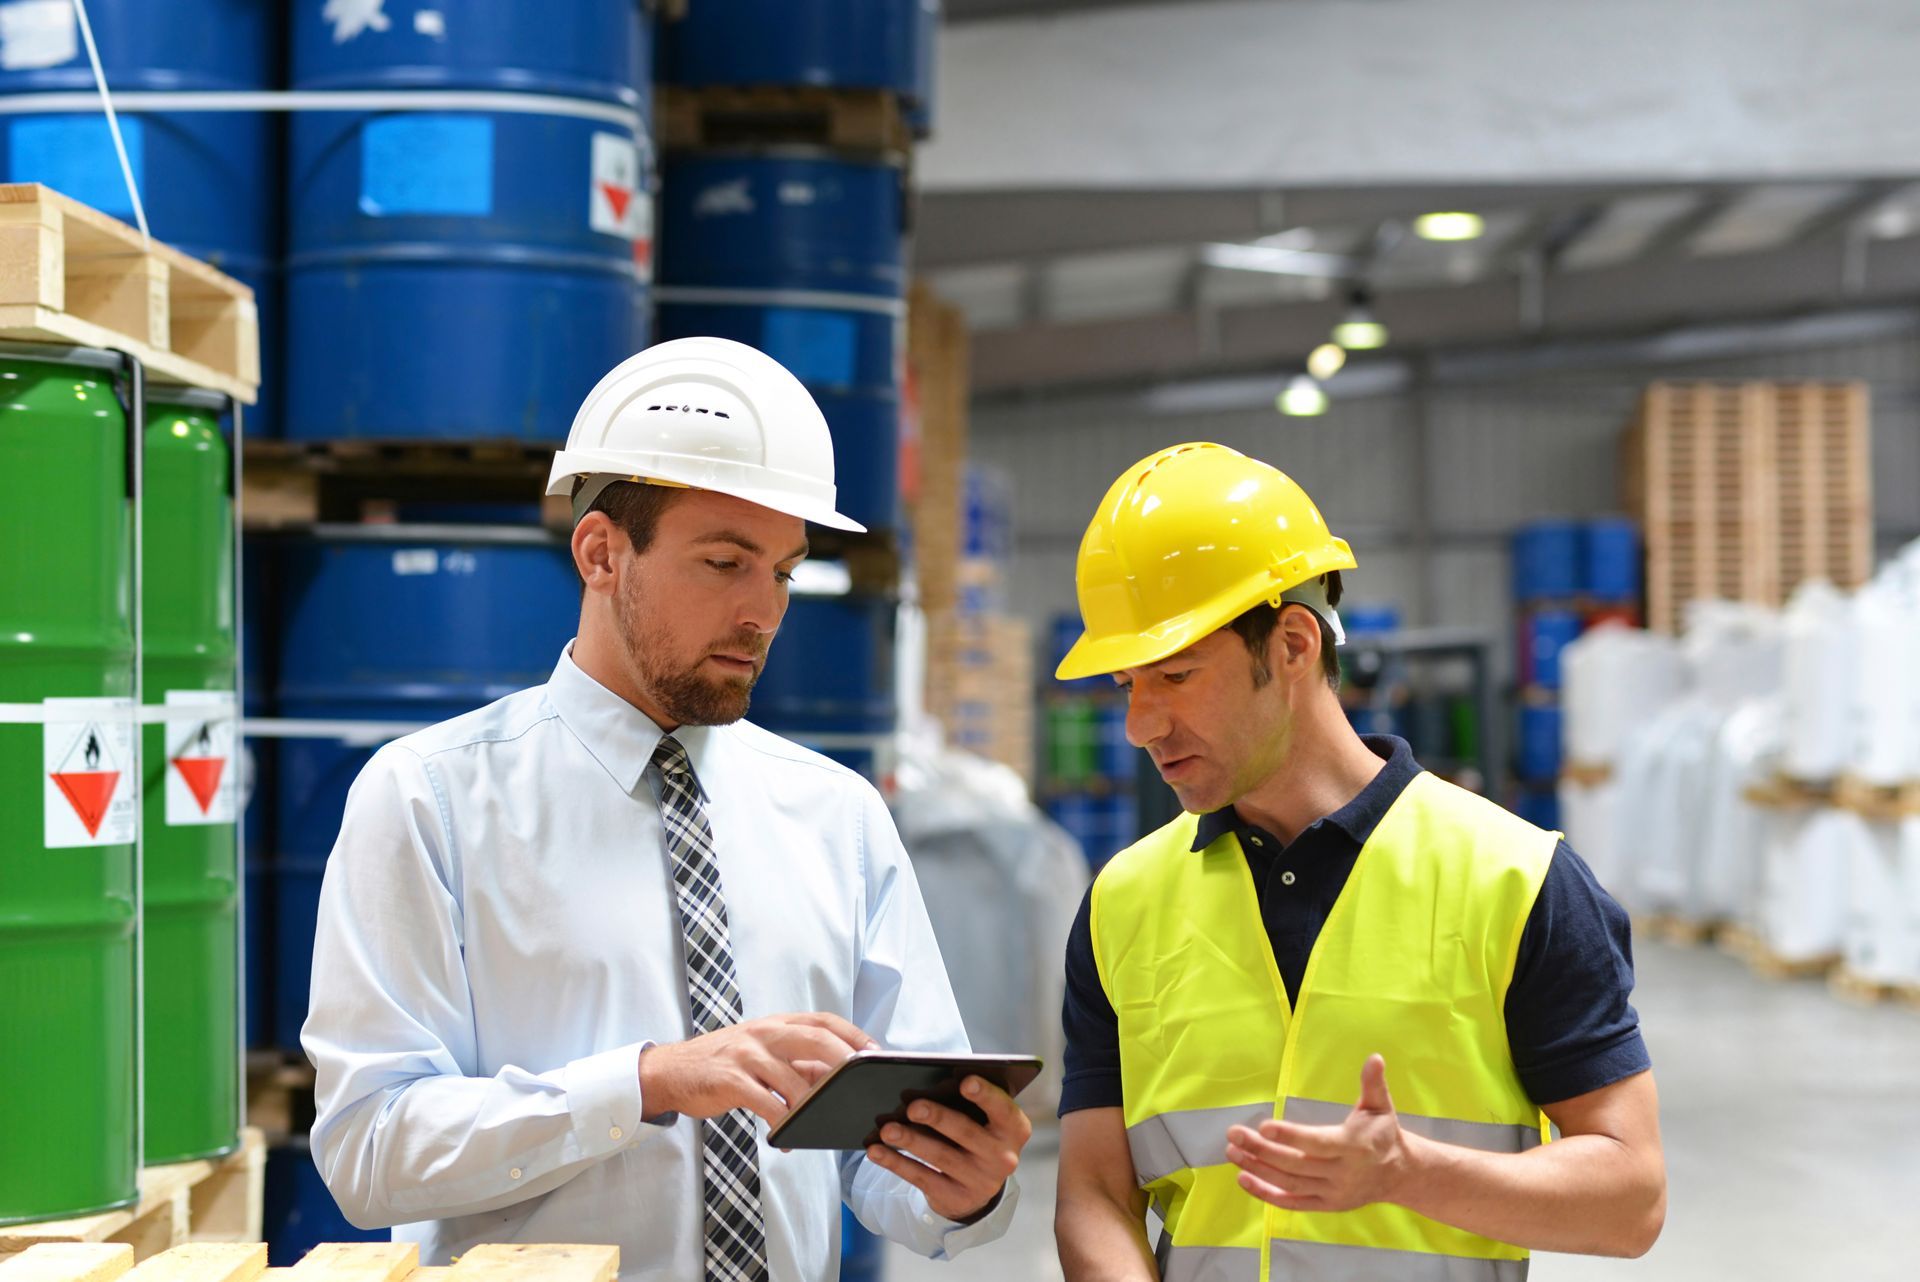 a specialty chemical supplier speaks with a foreman in the logistics industry work in a warehouse with chemicals | they rely on a specialty chemical supplier